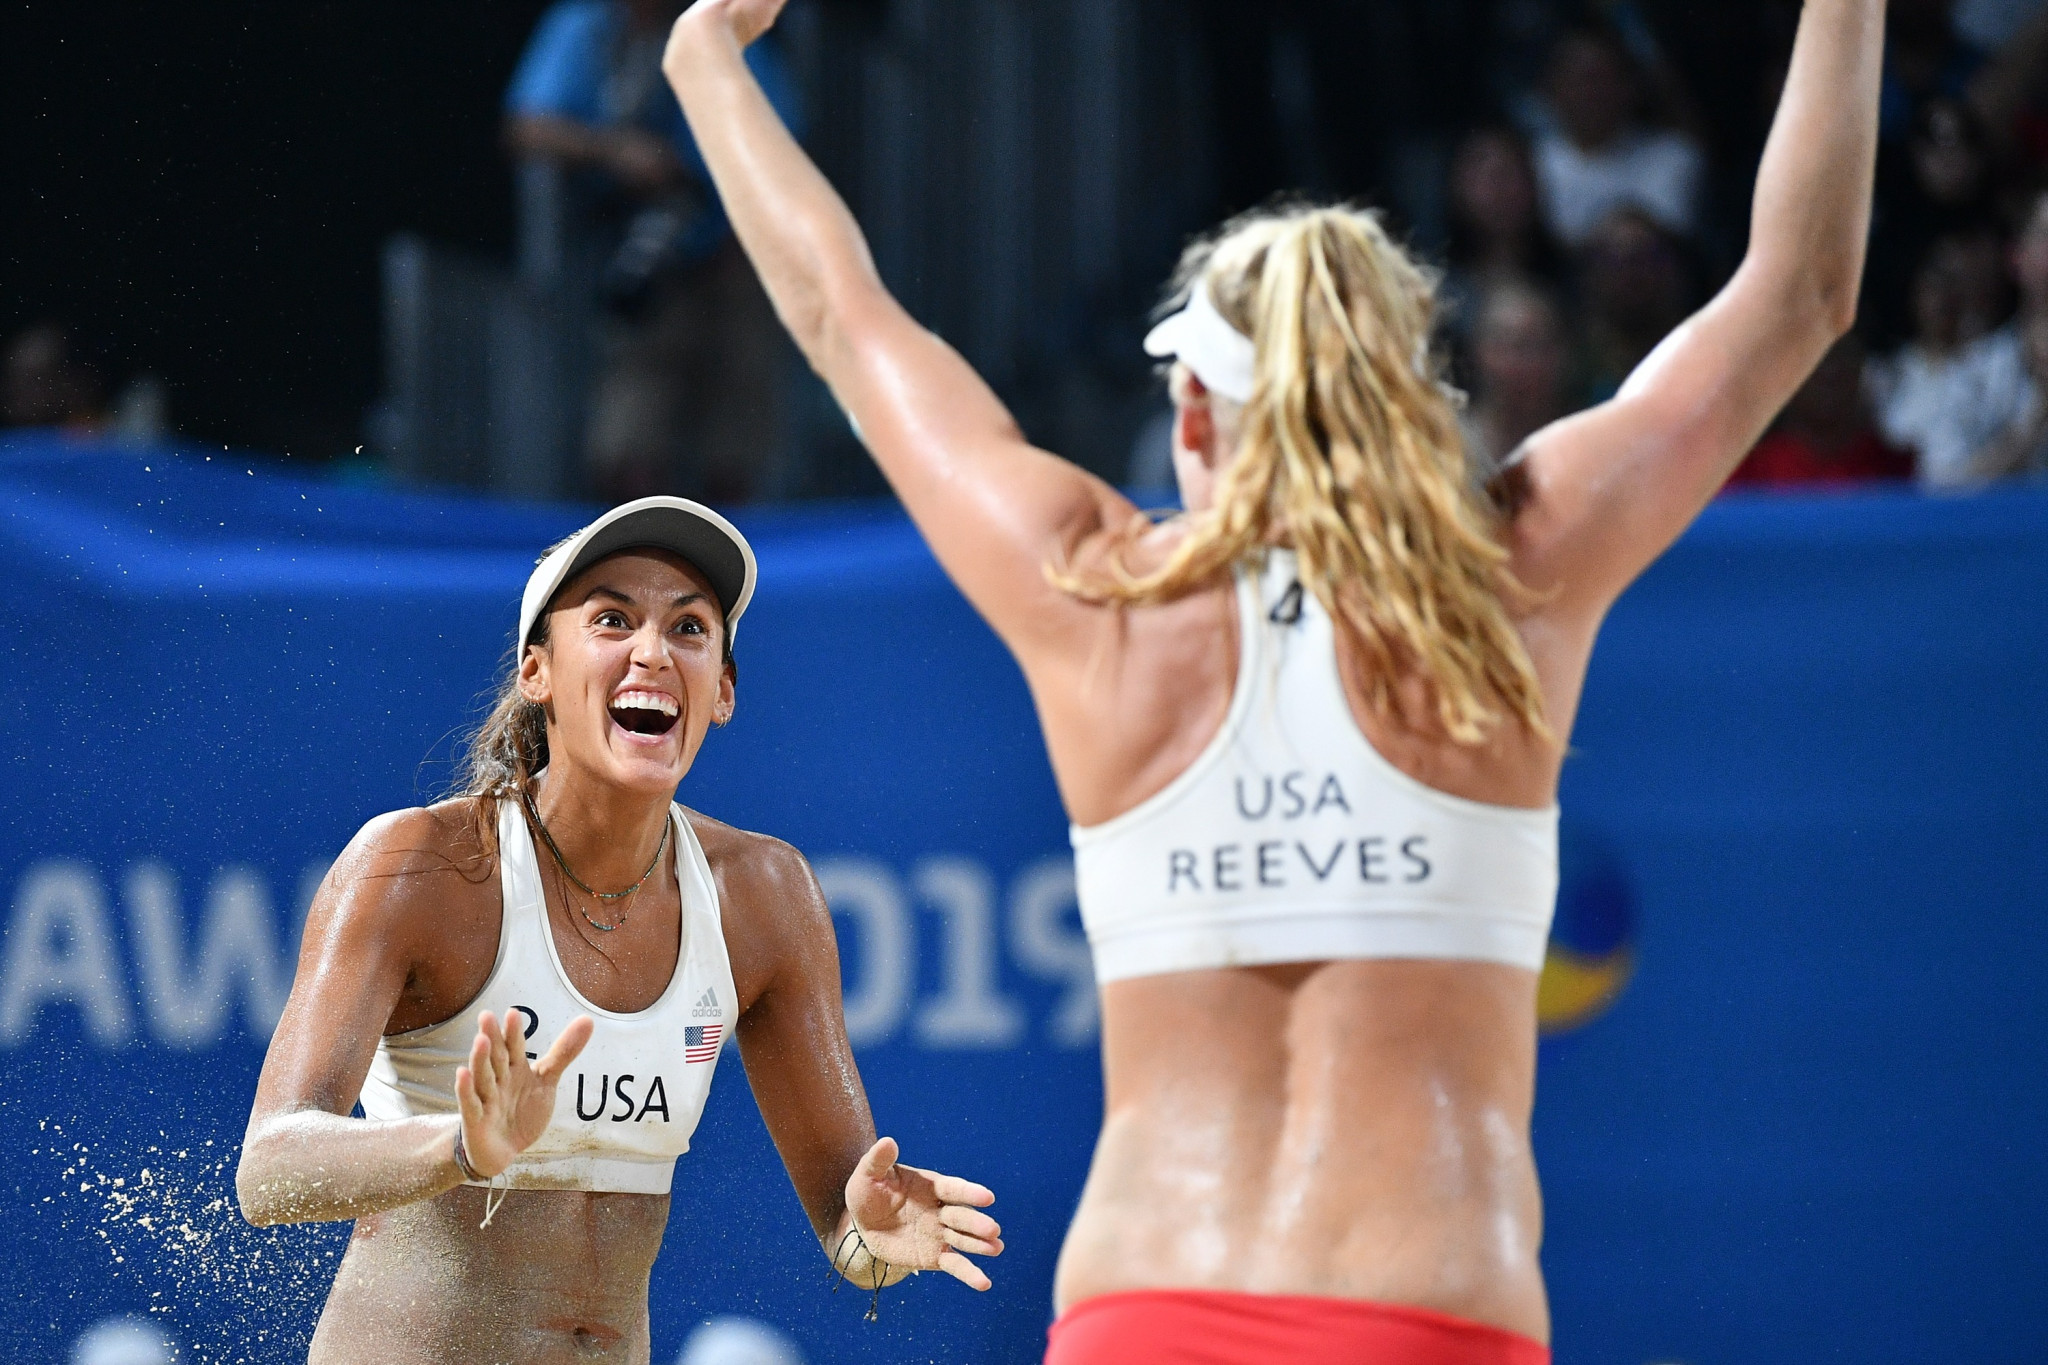 United States won the women's 4x4 beach volleyball title ©ANOC